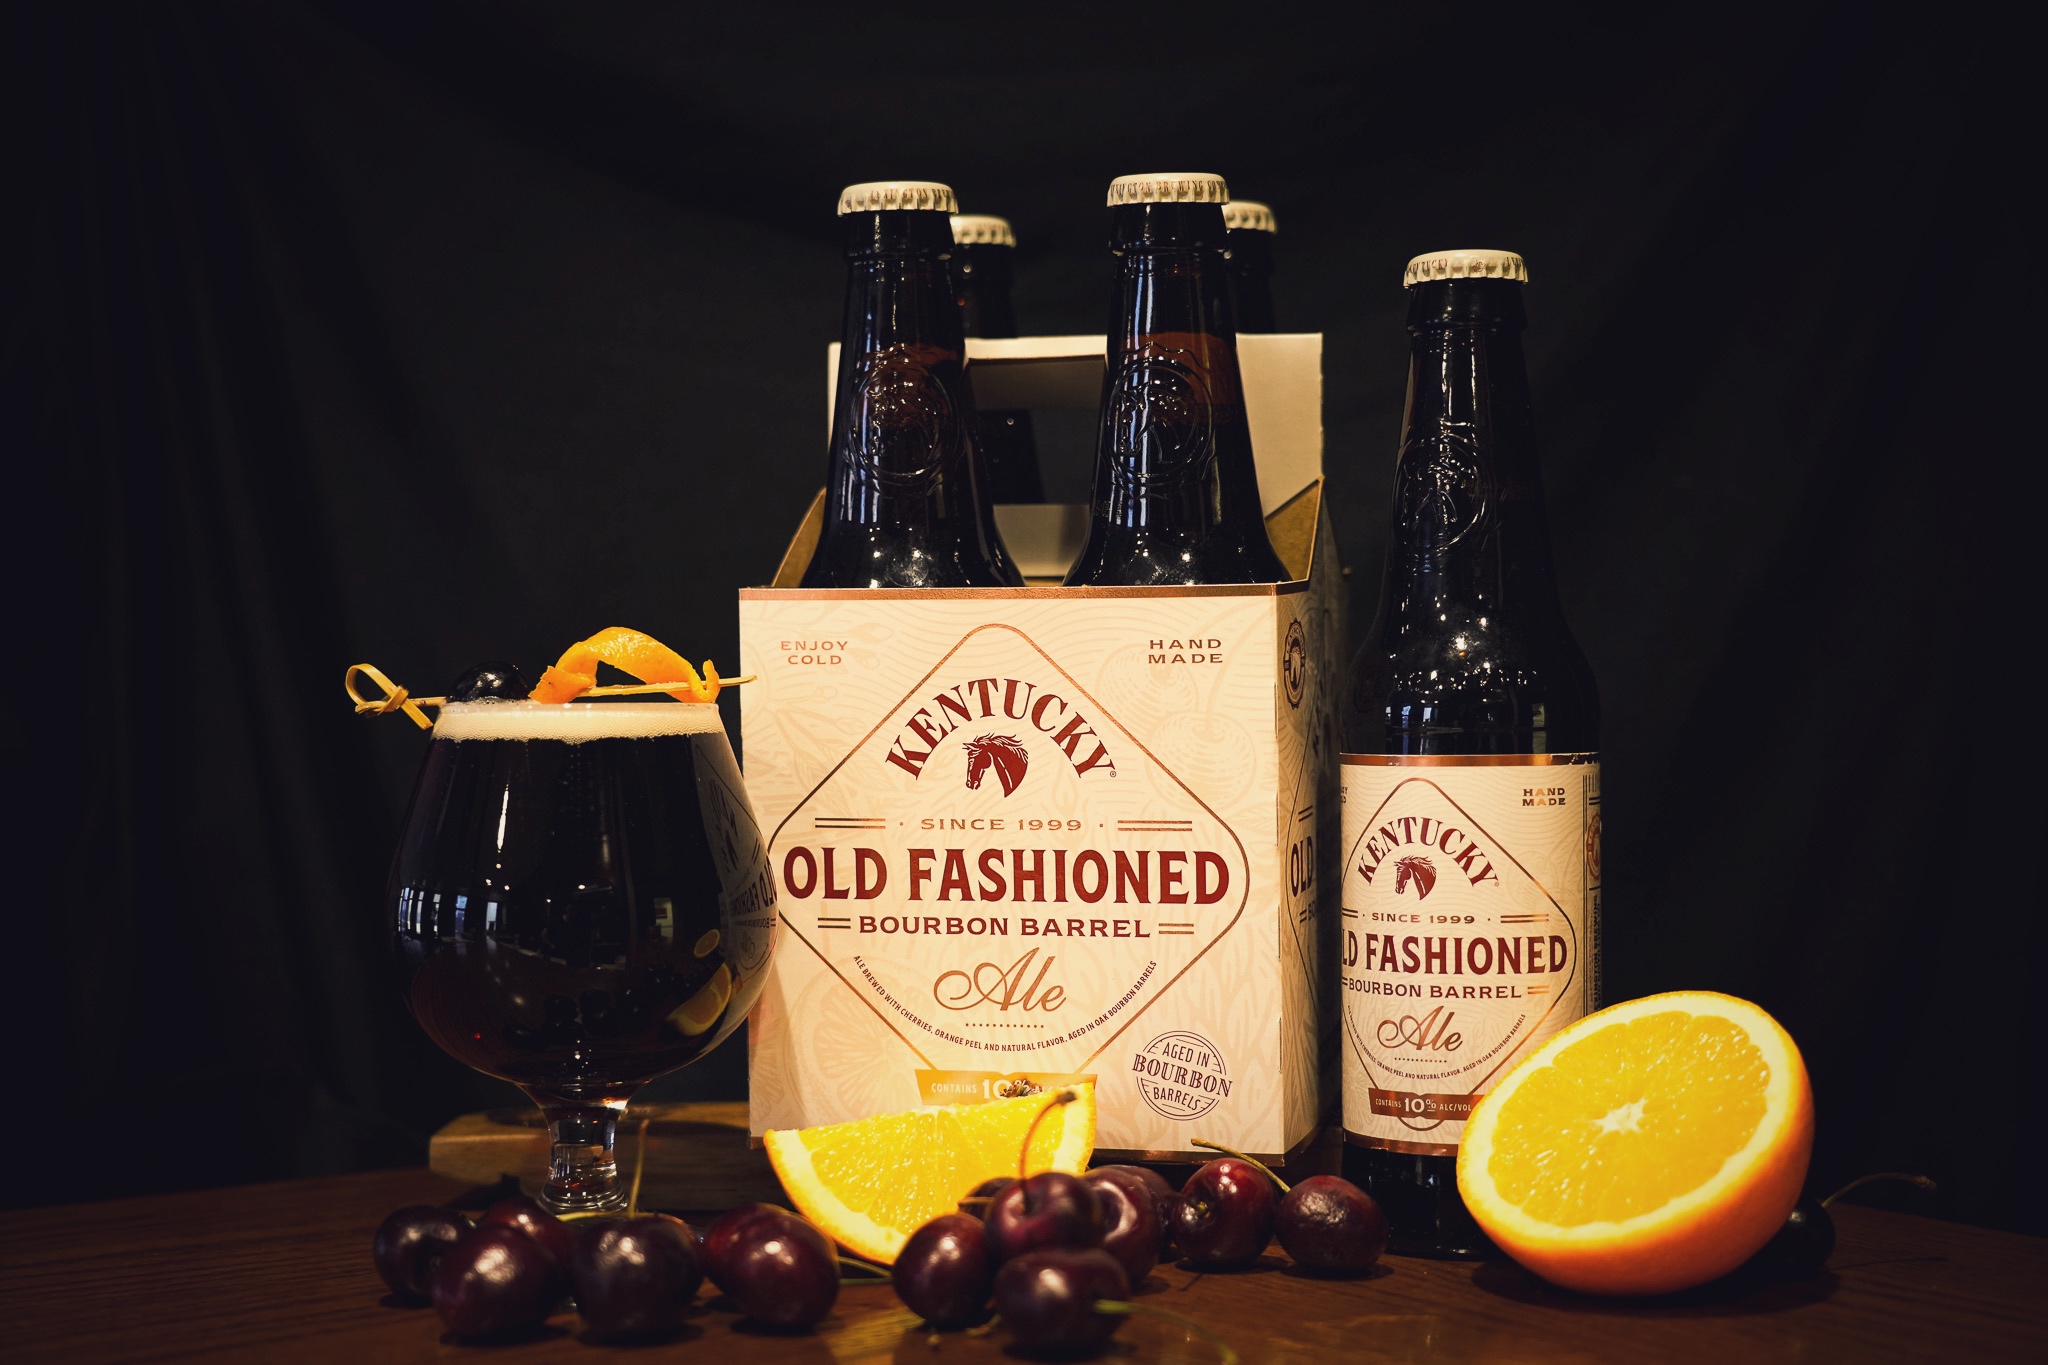 New Seasonal Bourbon Barrel Ale Brewed with “Old Fashioned” Ingredients